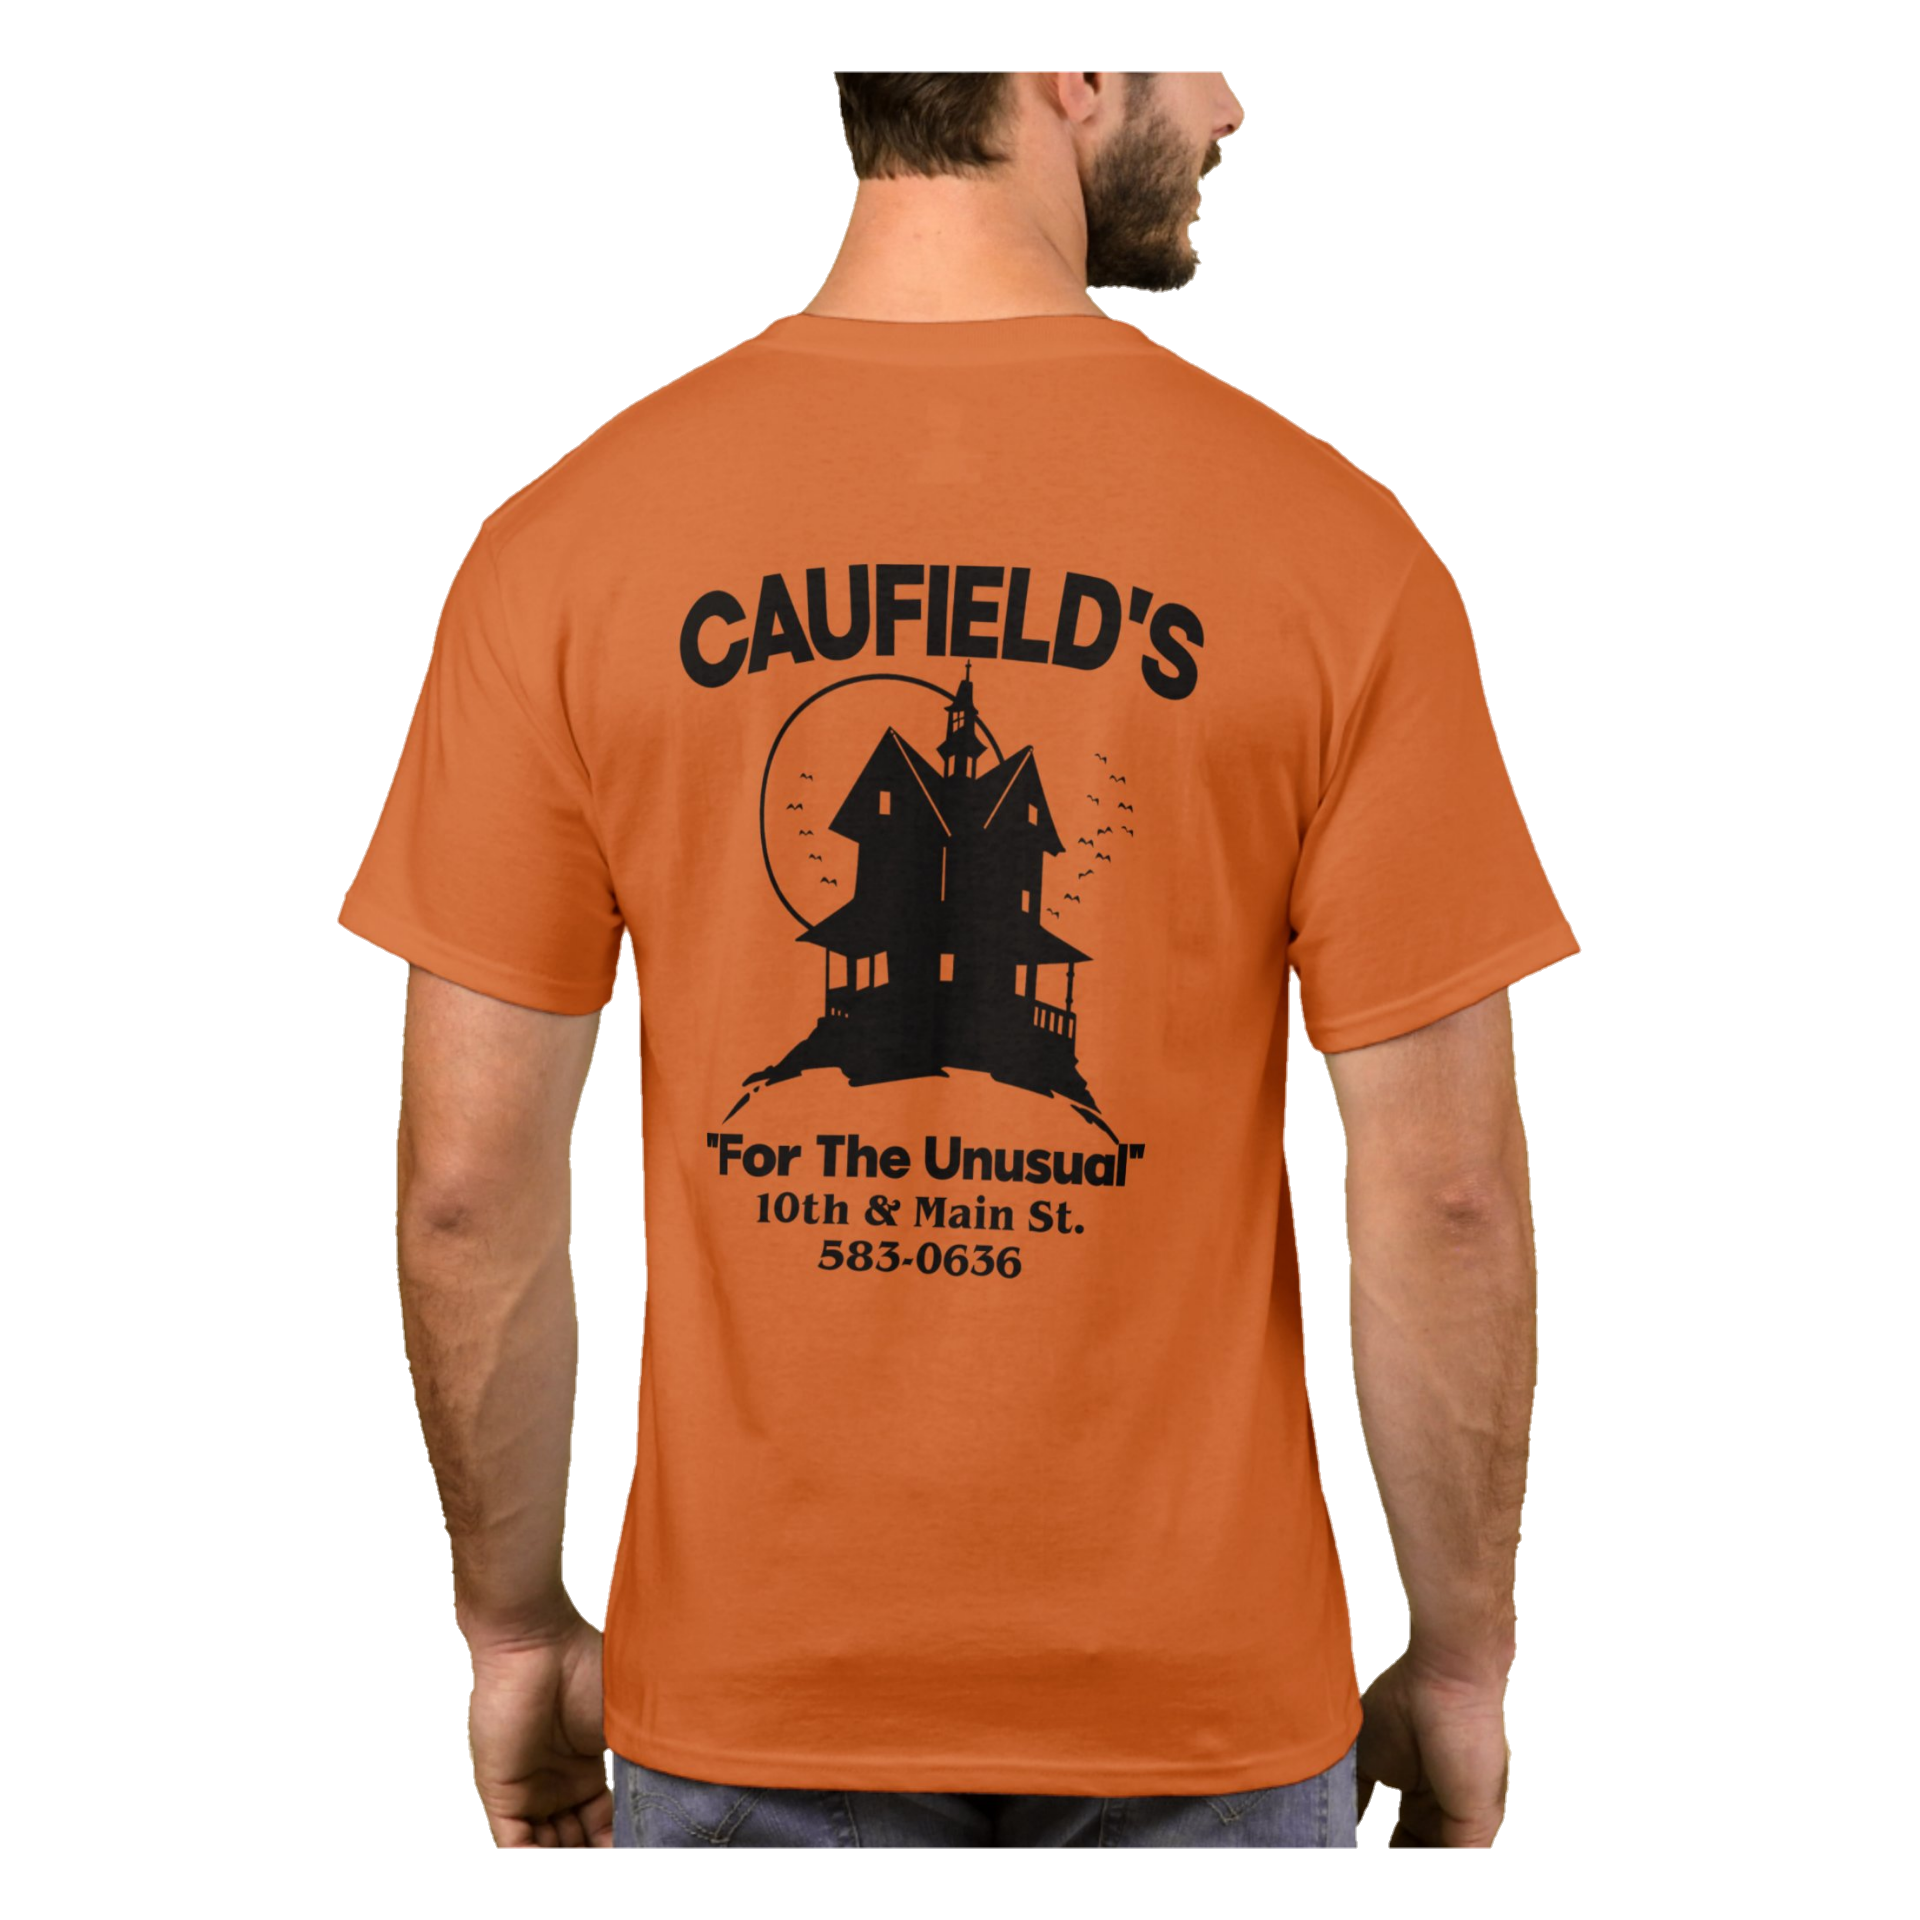 Caufield's Novelty 90's Throwback! Haunted House T-Shirt